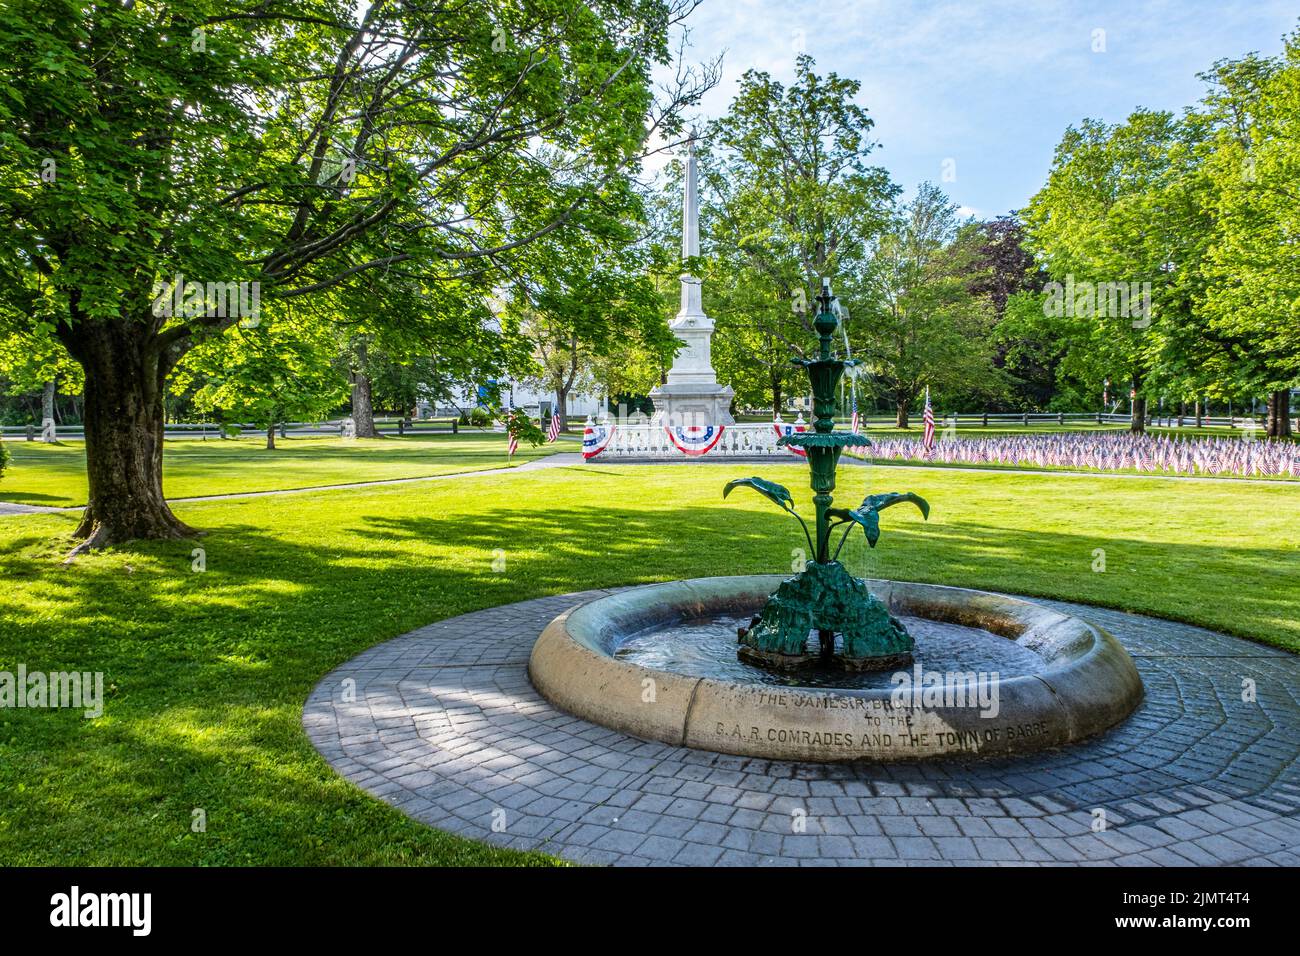 A water fountain on the Barre, MA Town Common Stock Photo